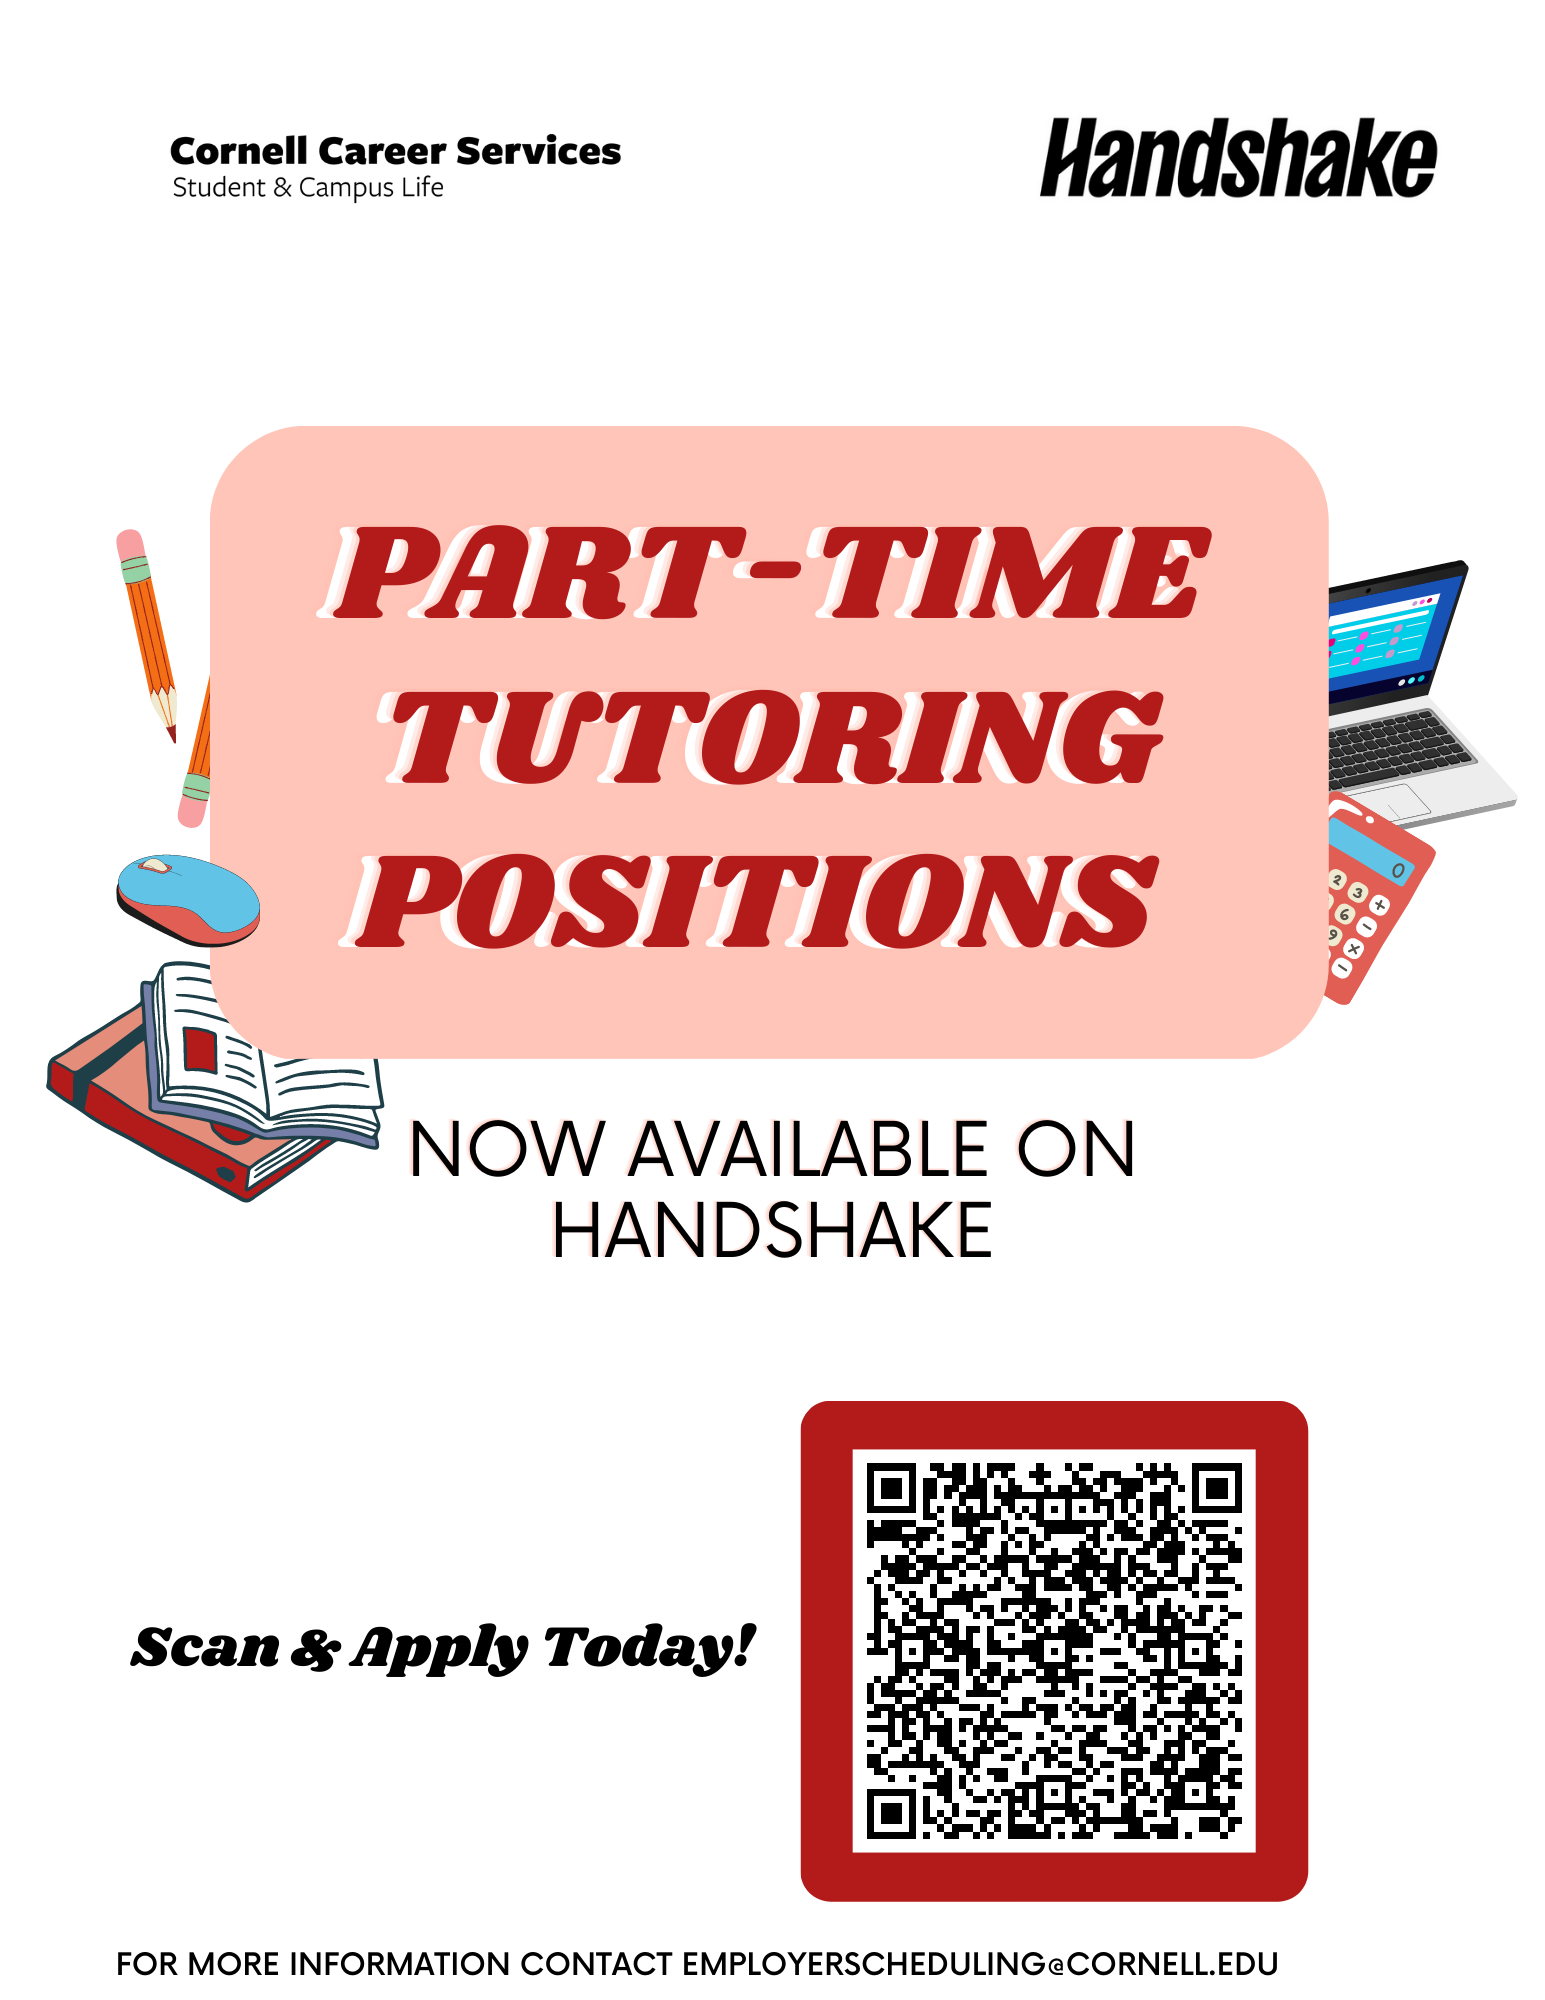 Part-time tutoring positions